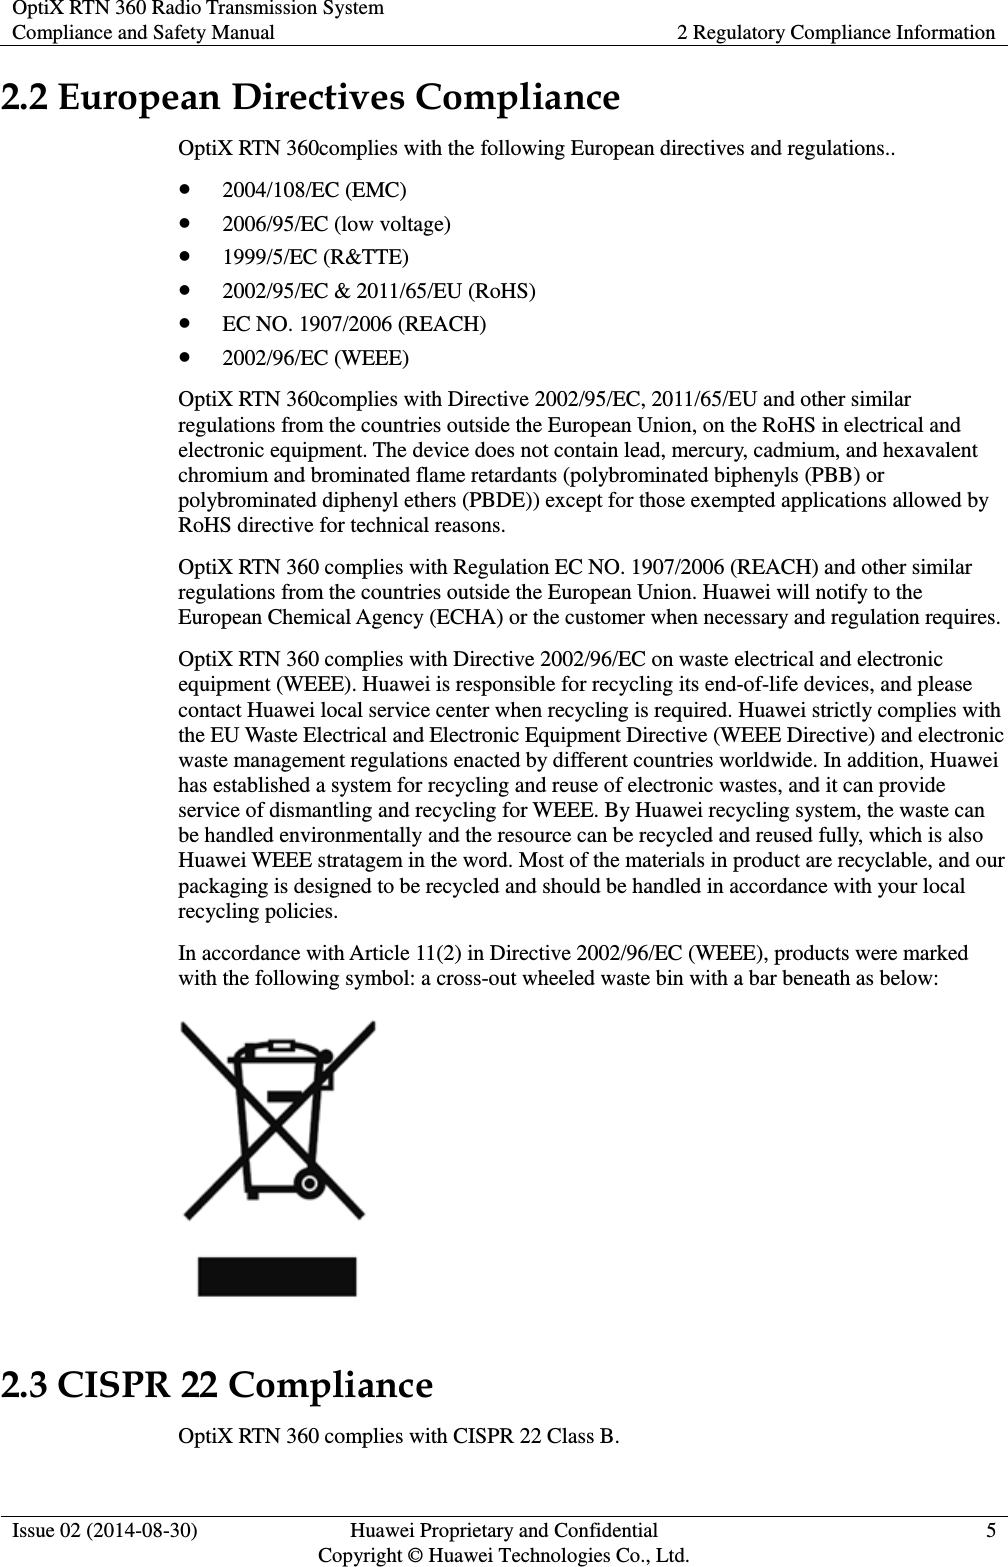 OptiX RTN 360 Radio Transmission System Compliance and Safety Manual 2 Regulatory Compliance Information  Issue 02 (2014-08-30) Huawei Proprietary and Confidential                                     Copyright © Huawei Technologies Co., Ltd. 5  2.2 European Directives Compliance OptiX RTN 360complies with the following European directives and regulations..  2004/108/EC (EMC)  2006/95/EC (low voltage)  1999/5/EC (R&amp;TTE)  2002/95/EC &amp; 2011/65/EU (RoHS)  EC NO. 1907/2006 (REACH)  2002/96/EC (WEEE) OptiX RTN 360complies with Directive 2002/95/EC, 2011/65/EU and other similar regulations from the countries outside the European Union, on the RoHS in electrical and electronic equipment. The device does not contain lead, mercury, cadmium, and hexavalent chromium and brominated flame retardants (polybrominated biphenyls (PBB) or polybrominated diphenyl ethers (PBDE)) except for those exempted applications allowed by RoHS directive for technical reasons. OptiX RTN 360 complies with Regulation EC NO. 1907/2006 (REACH) and other similar regulations from the countries outside the European Union. Huawei will notify to the European Chemical Agency (ECHA) or the customer when necessary and regulation requires. OptiX RTN 360 complies with Directive 2002/96/EC on waste electrical and electronic equipment (WEEE). Huawei is responsible for recycling its end-of-life devices, and please contact Huawei local service center when recycling is required. Huawei strictly complies with the EU Waste Electrical and Electronic Equipment Directive (WEEE Directive) and electronic waste management regulations enacted by different countries worldwide. In addition, Huawei has established a system for recycling and reuse of electronic wastes, and it can provide service of dismantling and recycling for WEEE. By Huawei recycling system, the waste can be handled environmentally and the resource can be recycled and reused fully, which is also Huawei WEEE stratagem in the word. Most of the materials in product are recyclable, and our packaging is designed to be recycled and should be handled in accordance with your local recycling policies.   In accordance with Article 11(2) in Directive 2002/96/EC (WEEE), products were marked with the following symbol: a cross-out wheeled waste bin with a bar beneath as below:  2.3 CISPR 22 Compliance OptiX RTN 360 complies with CISPR 22 Class B. 